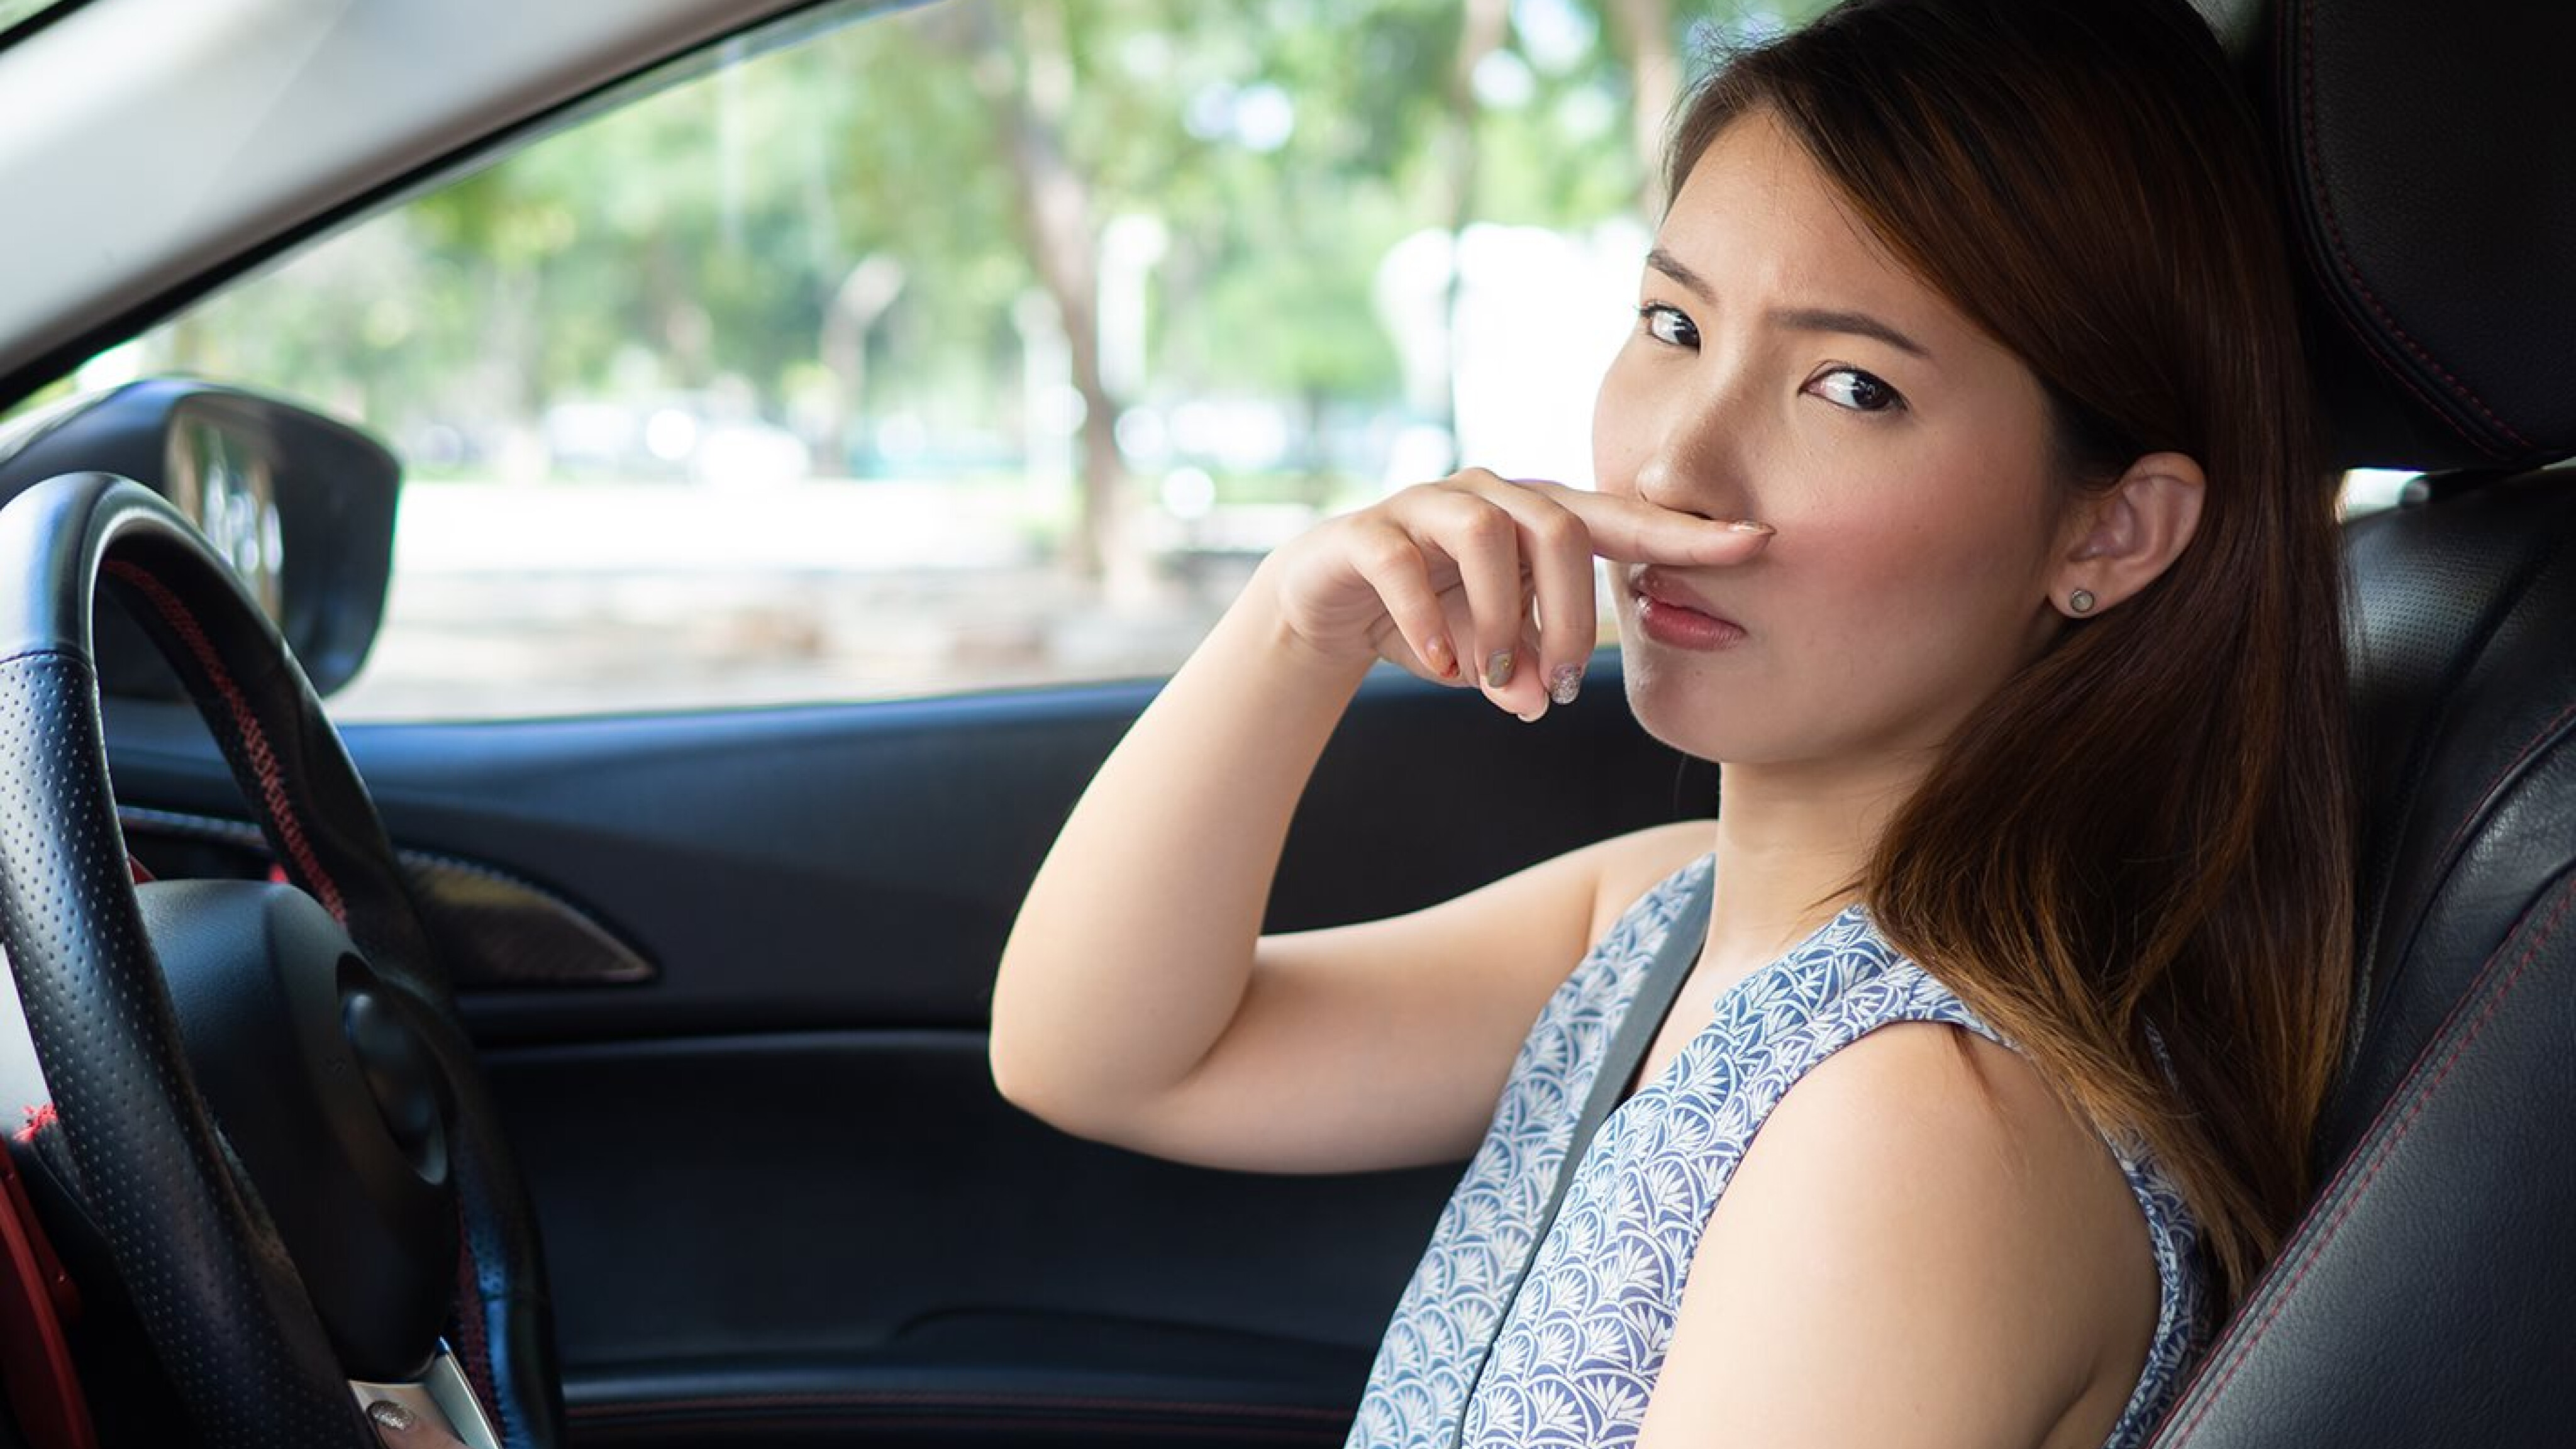 Is 'new car smell' toxic?